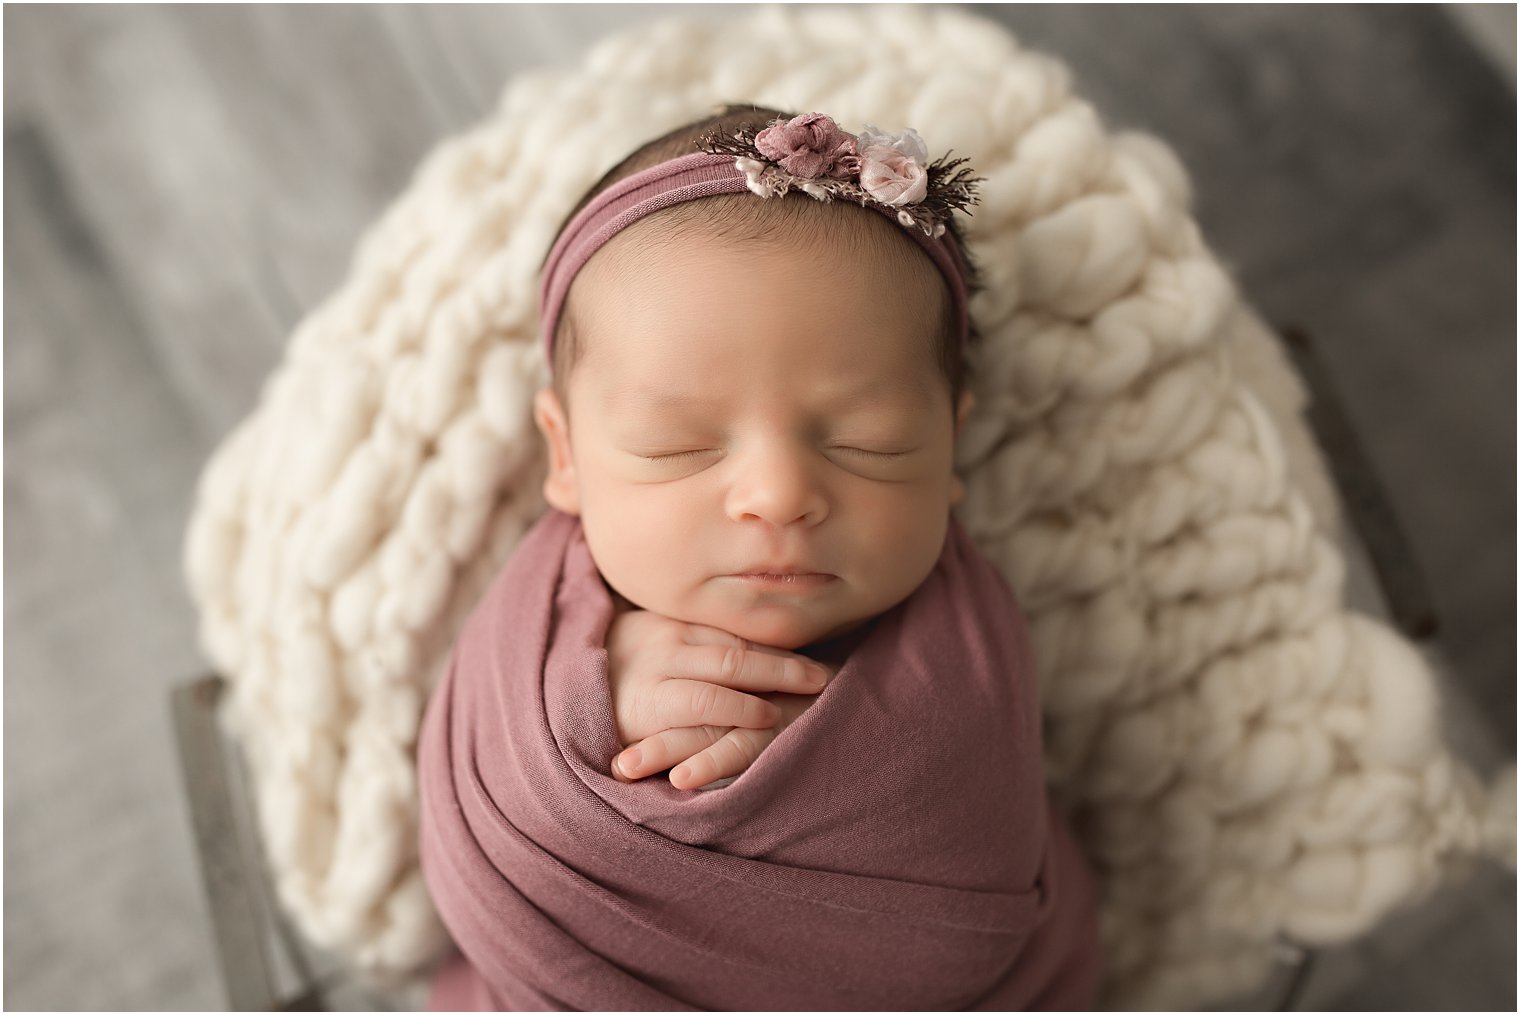 Wrapped newborn session with baby in a bowl | Photos by Newborn Photography